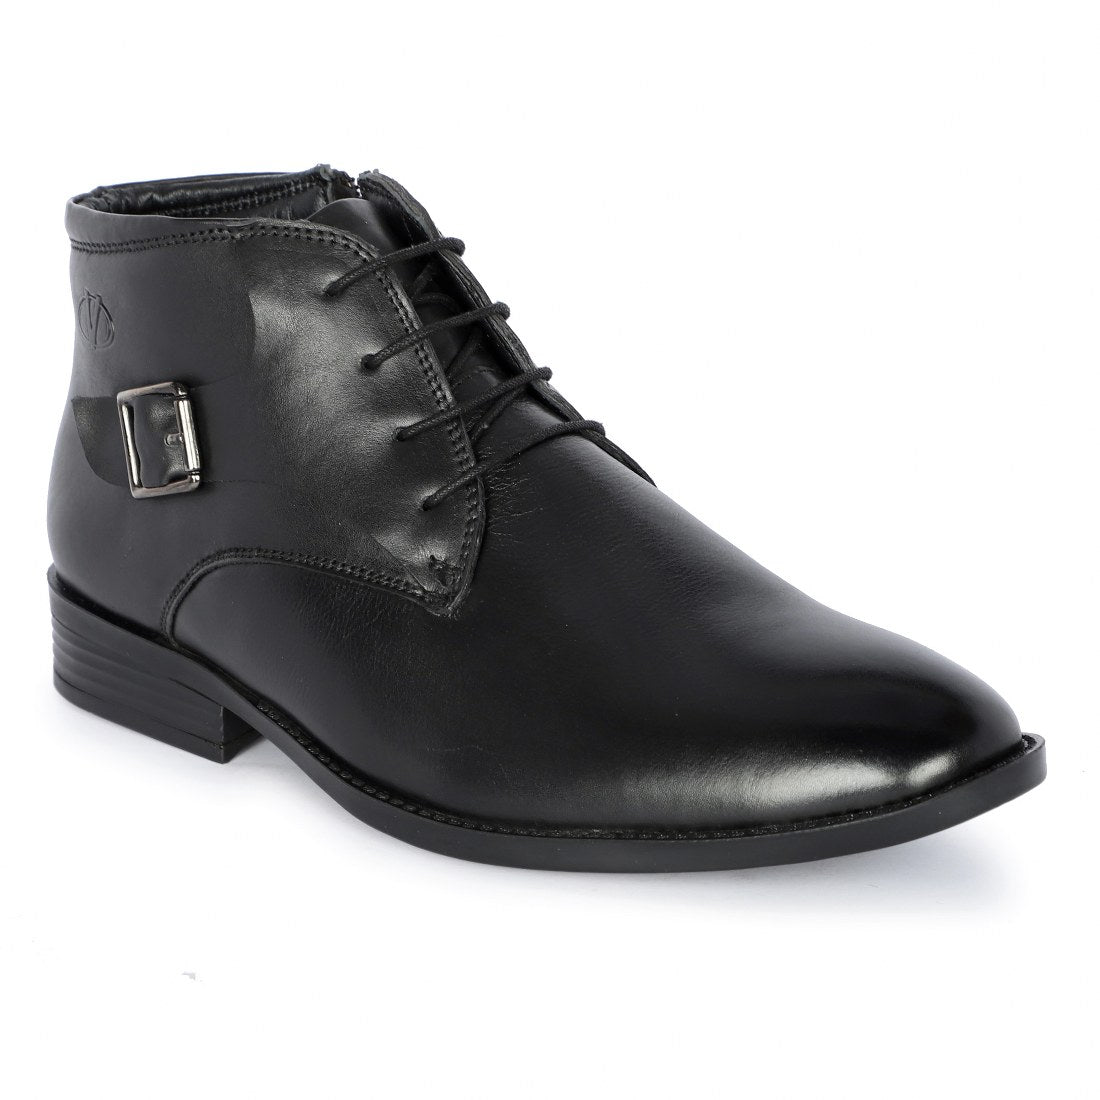 AMAZONA-76 MEN LEATHER BLACK FORMAL BOOT ANKLE DERBY.